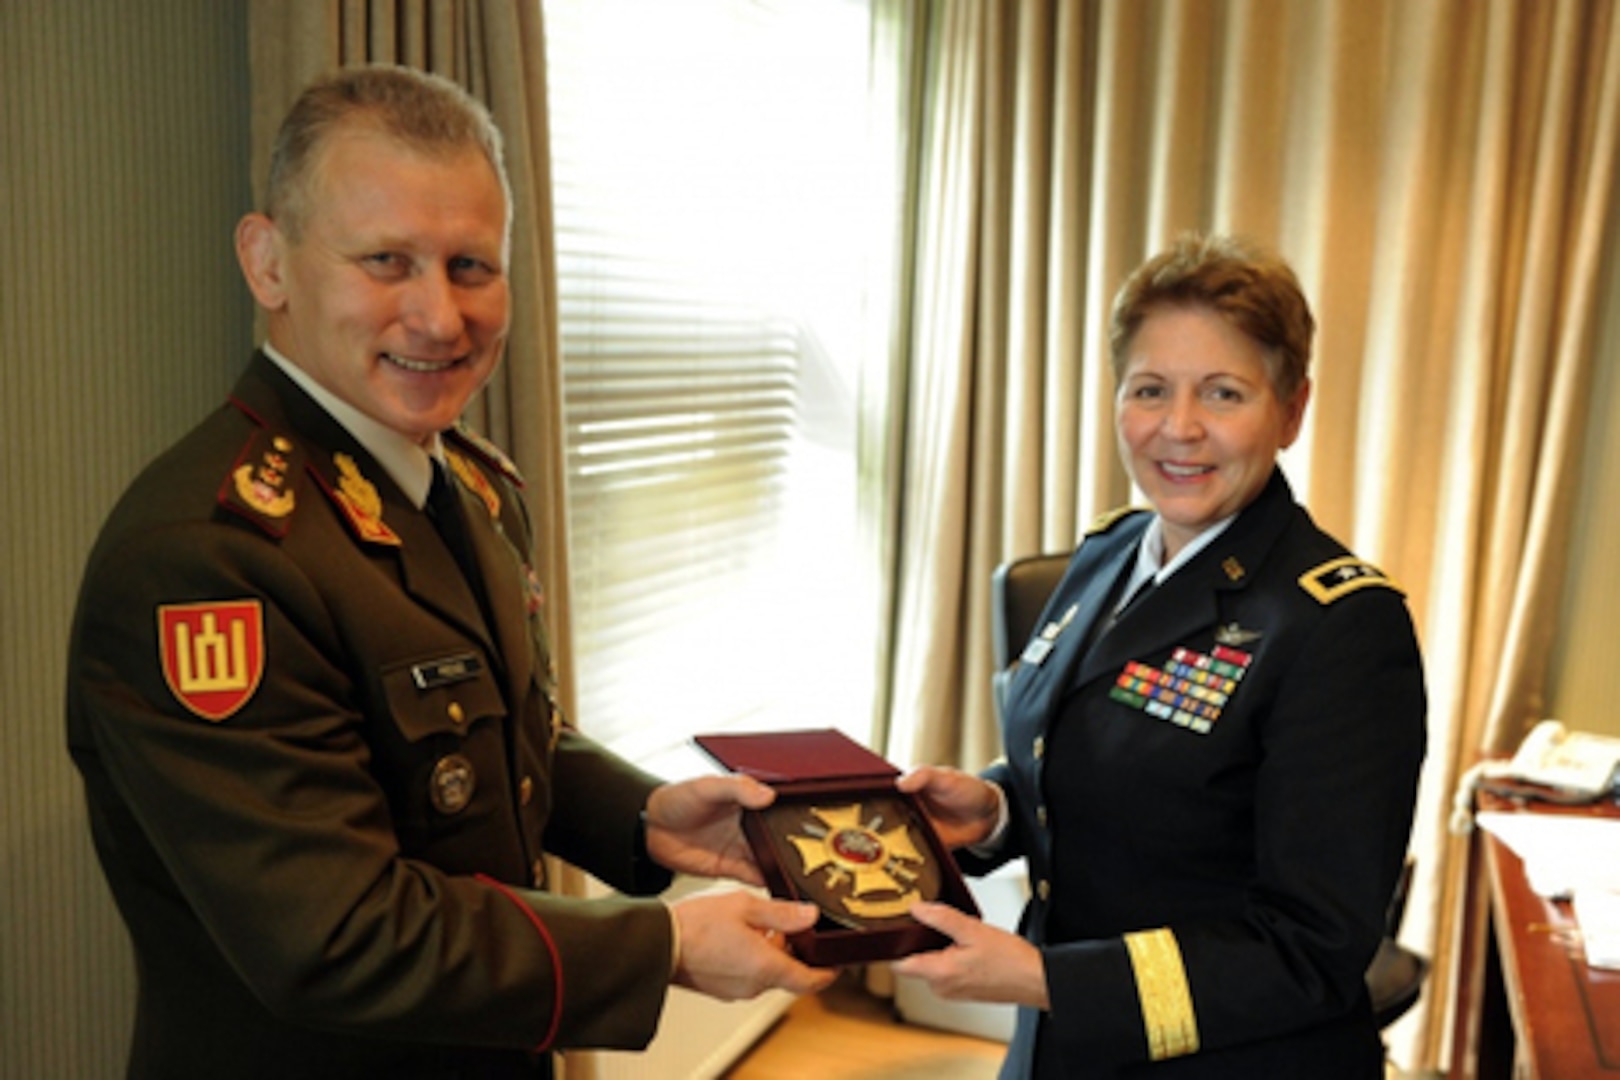 Army Maj. Gen. Jessica L. Wright, the adjutant general of the Pennsylvania National Guard, recently met with Maj. Gen. Arvydas Pocius, the Chief of Defence of Lithuania.